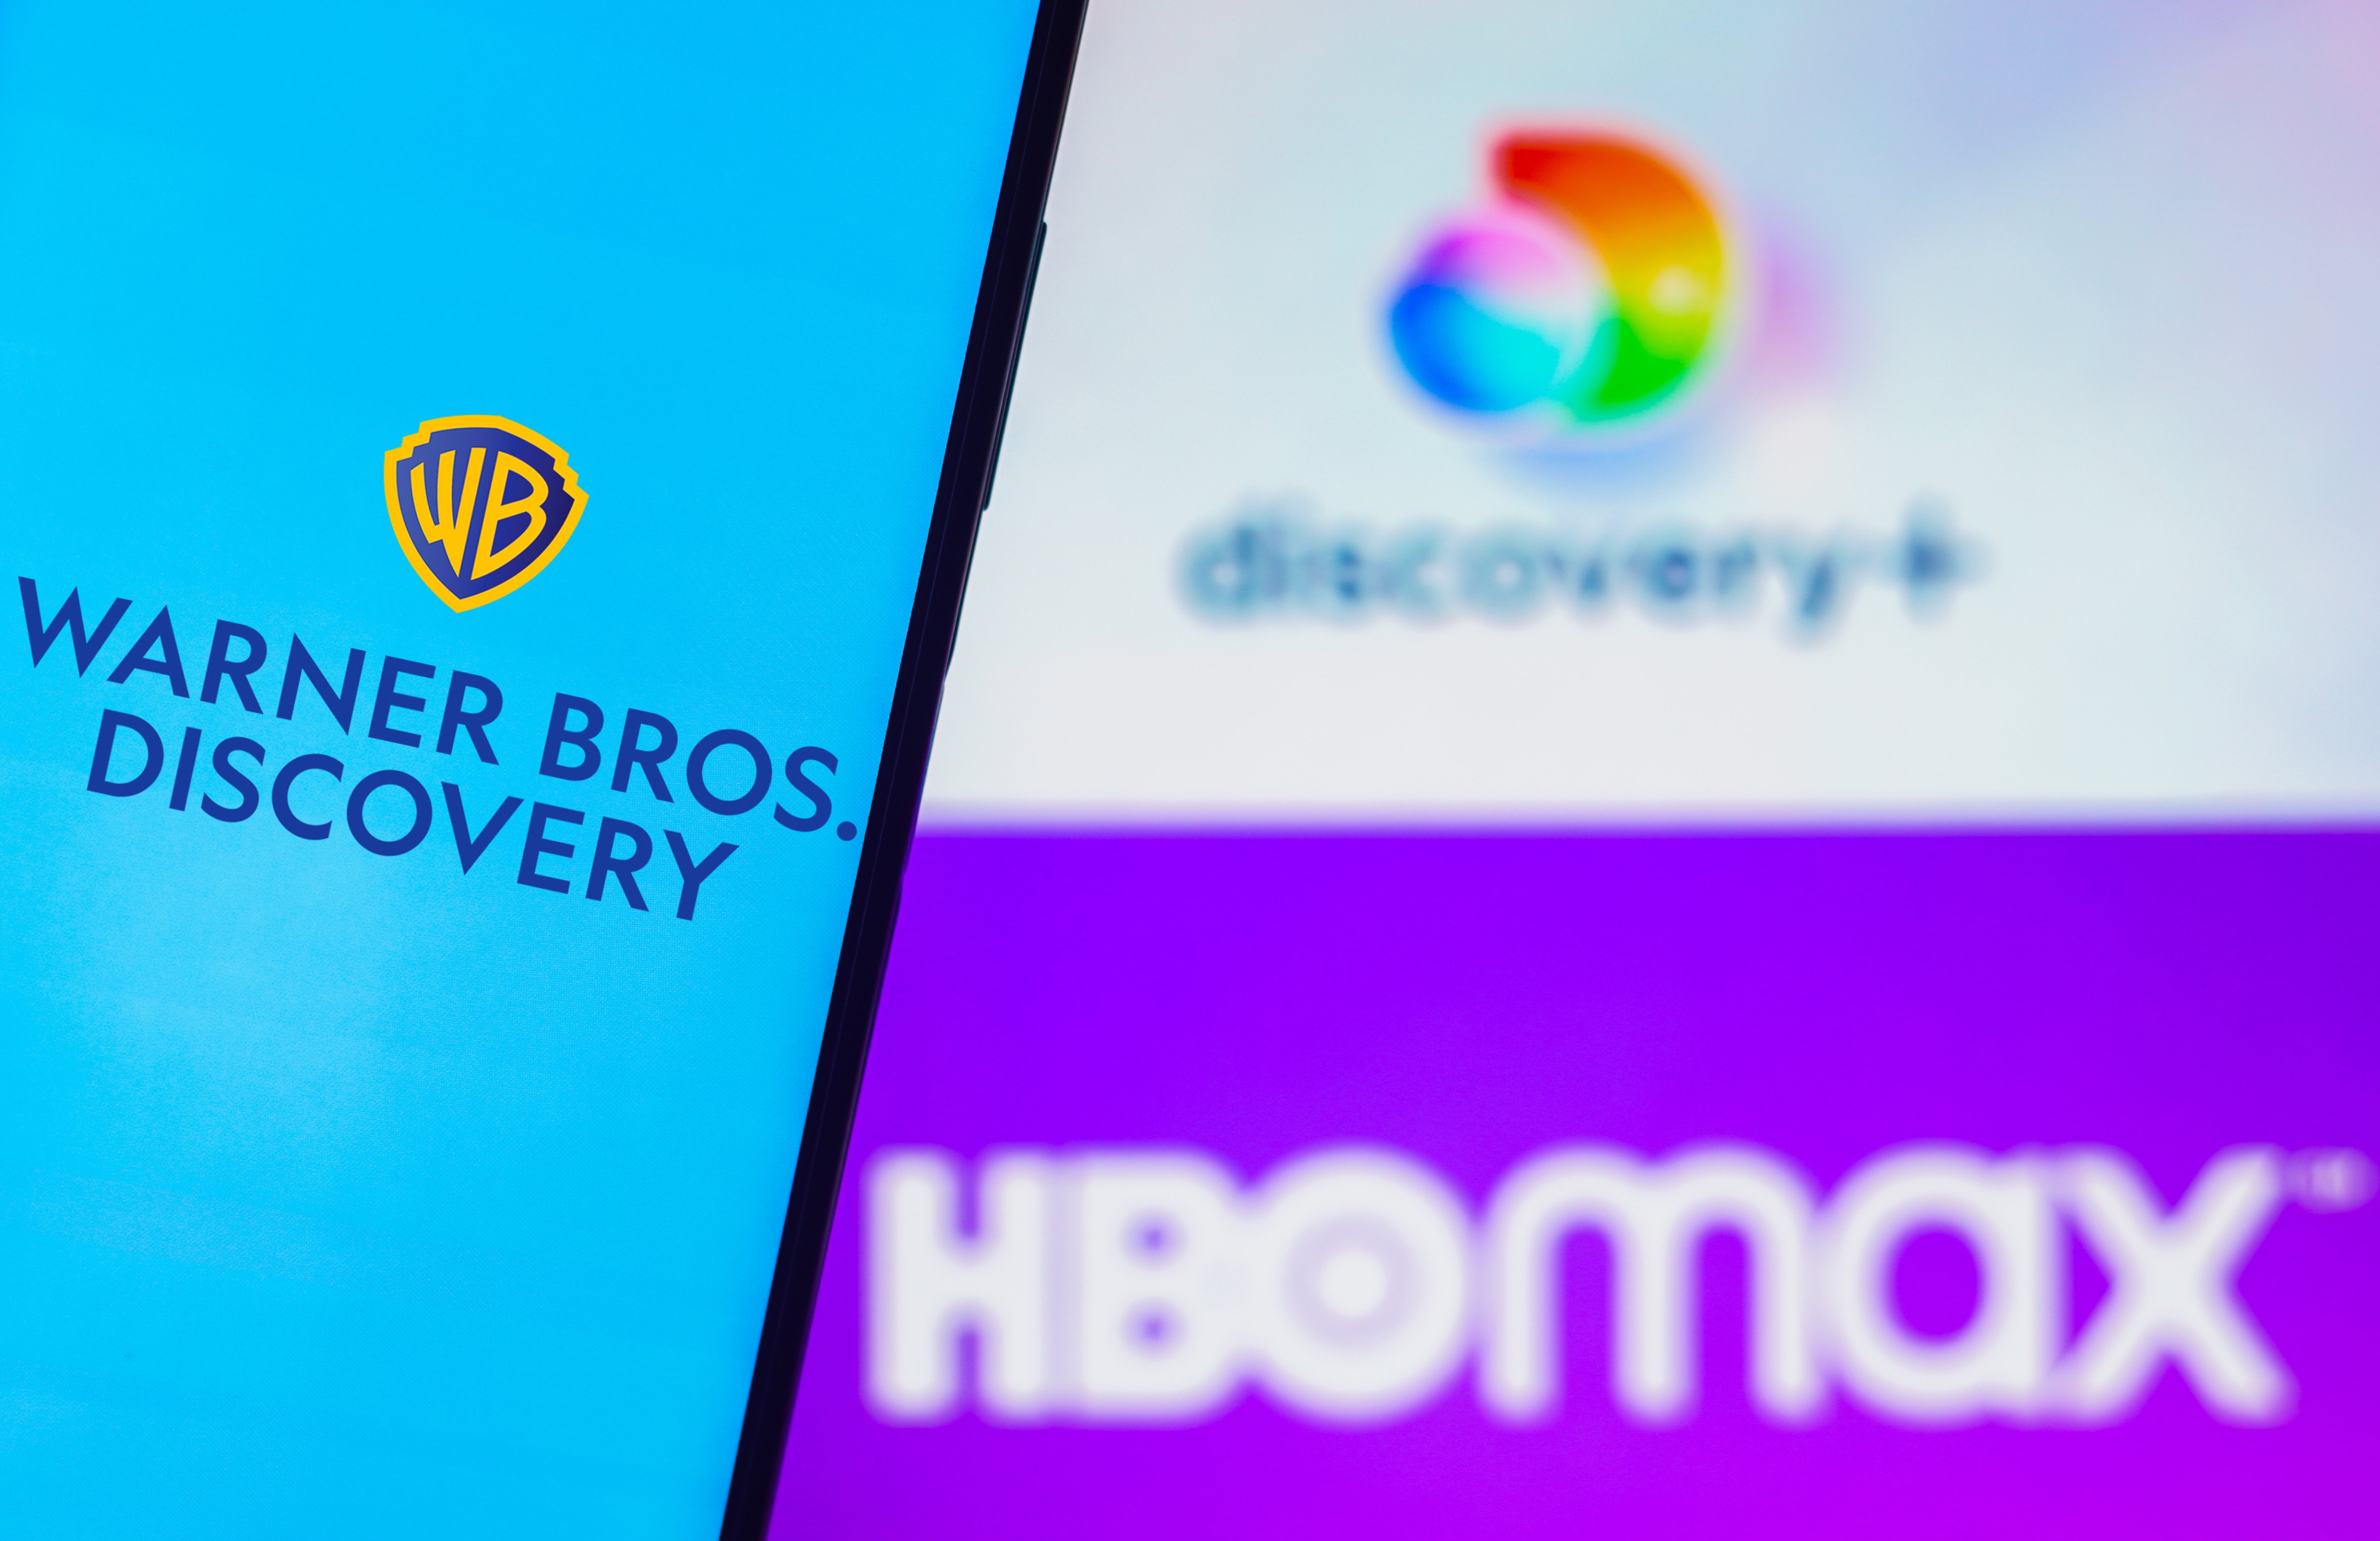 Logos for Warner Bros Discovery, HBO Max, and Discovery+ (Photo Illustration by Rafael Henrique/SOPA Images/LightRocket via Getty Images)